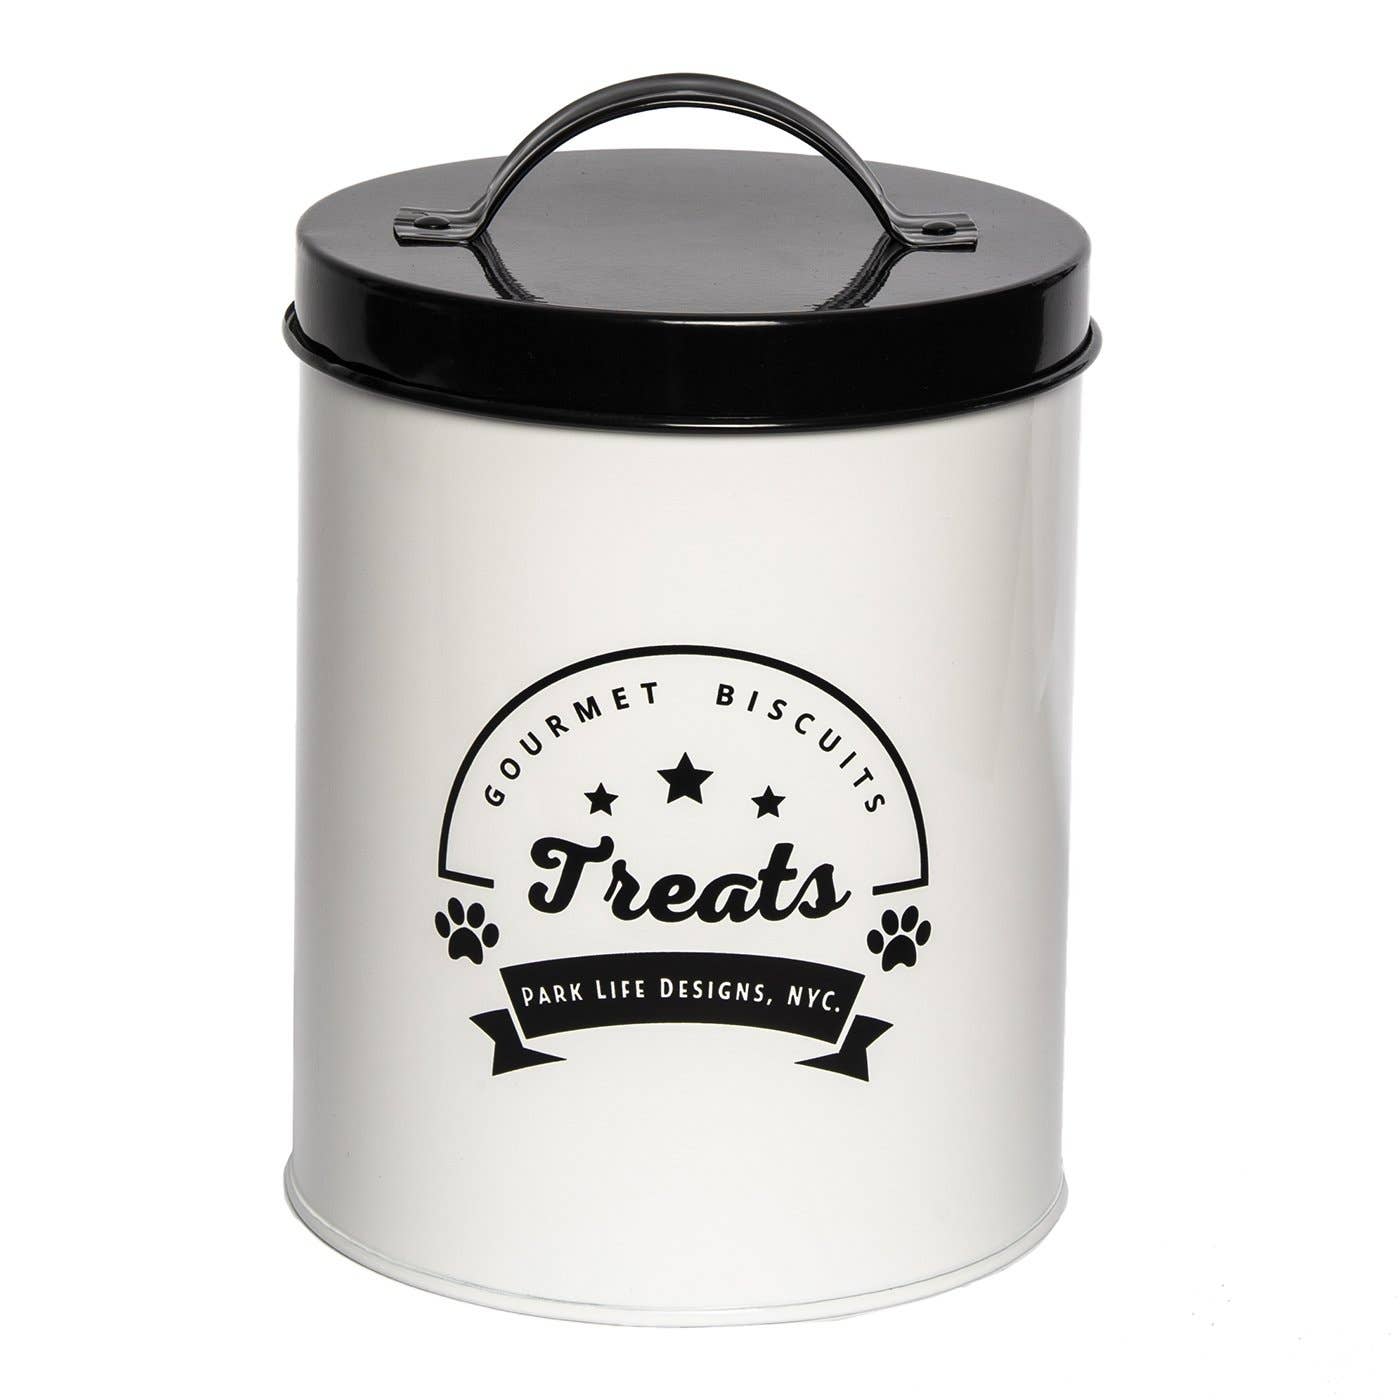 Park Life Gourmet Biscuits White Treat Canister *